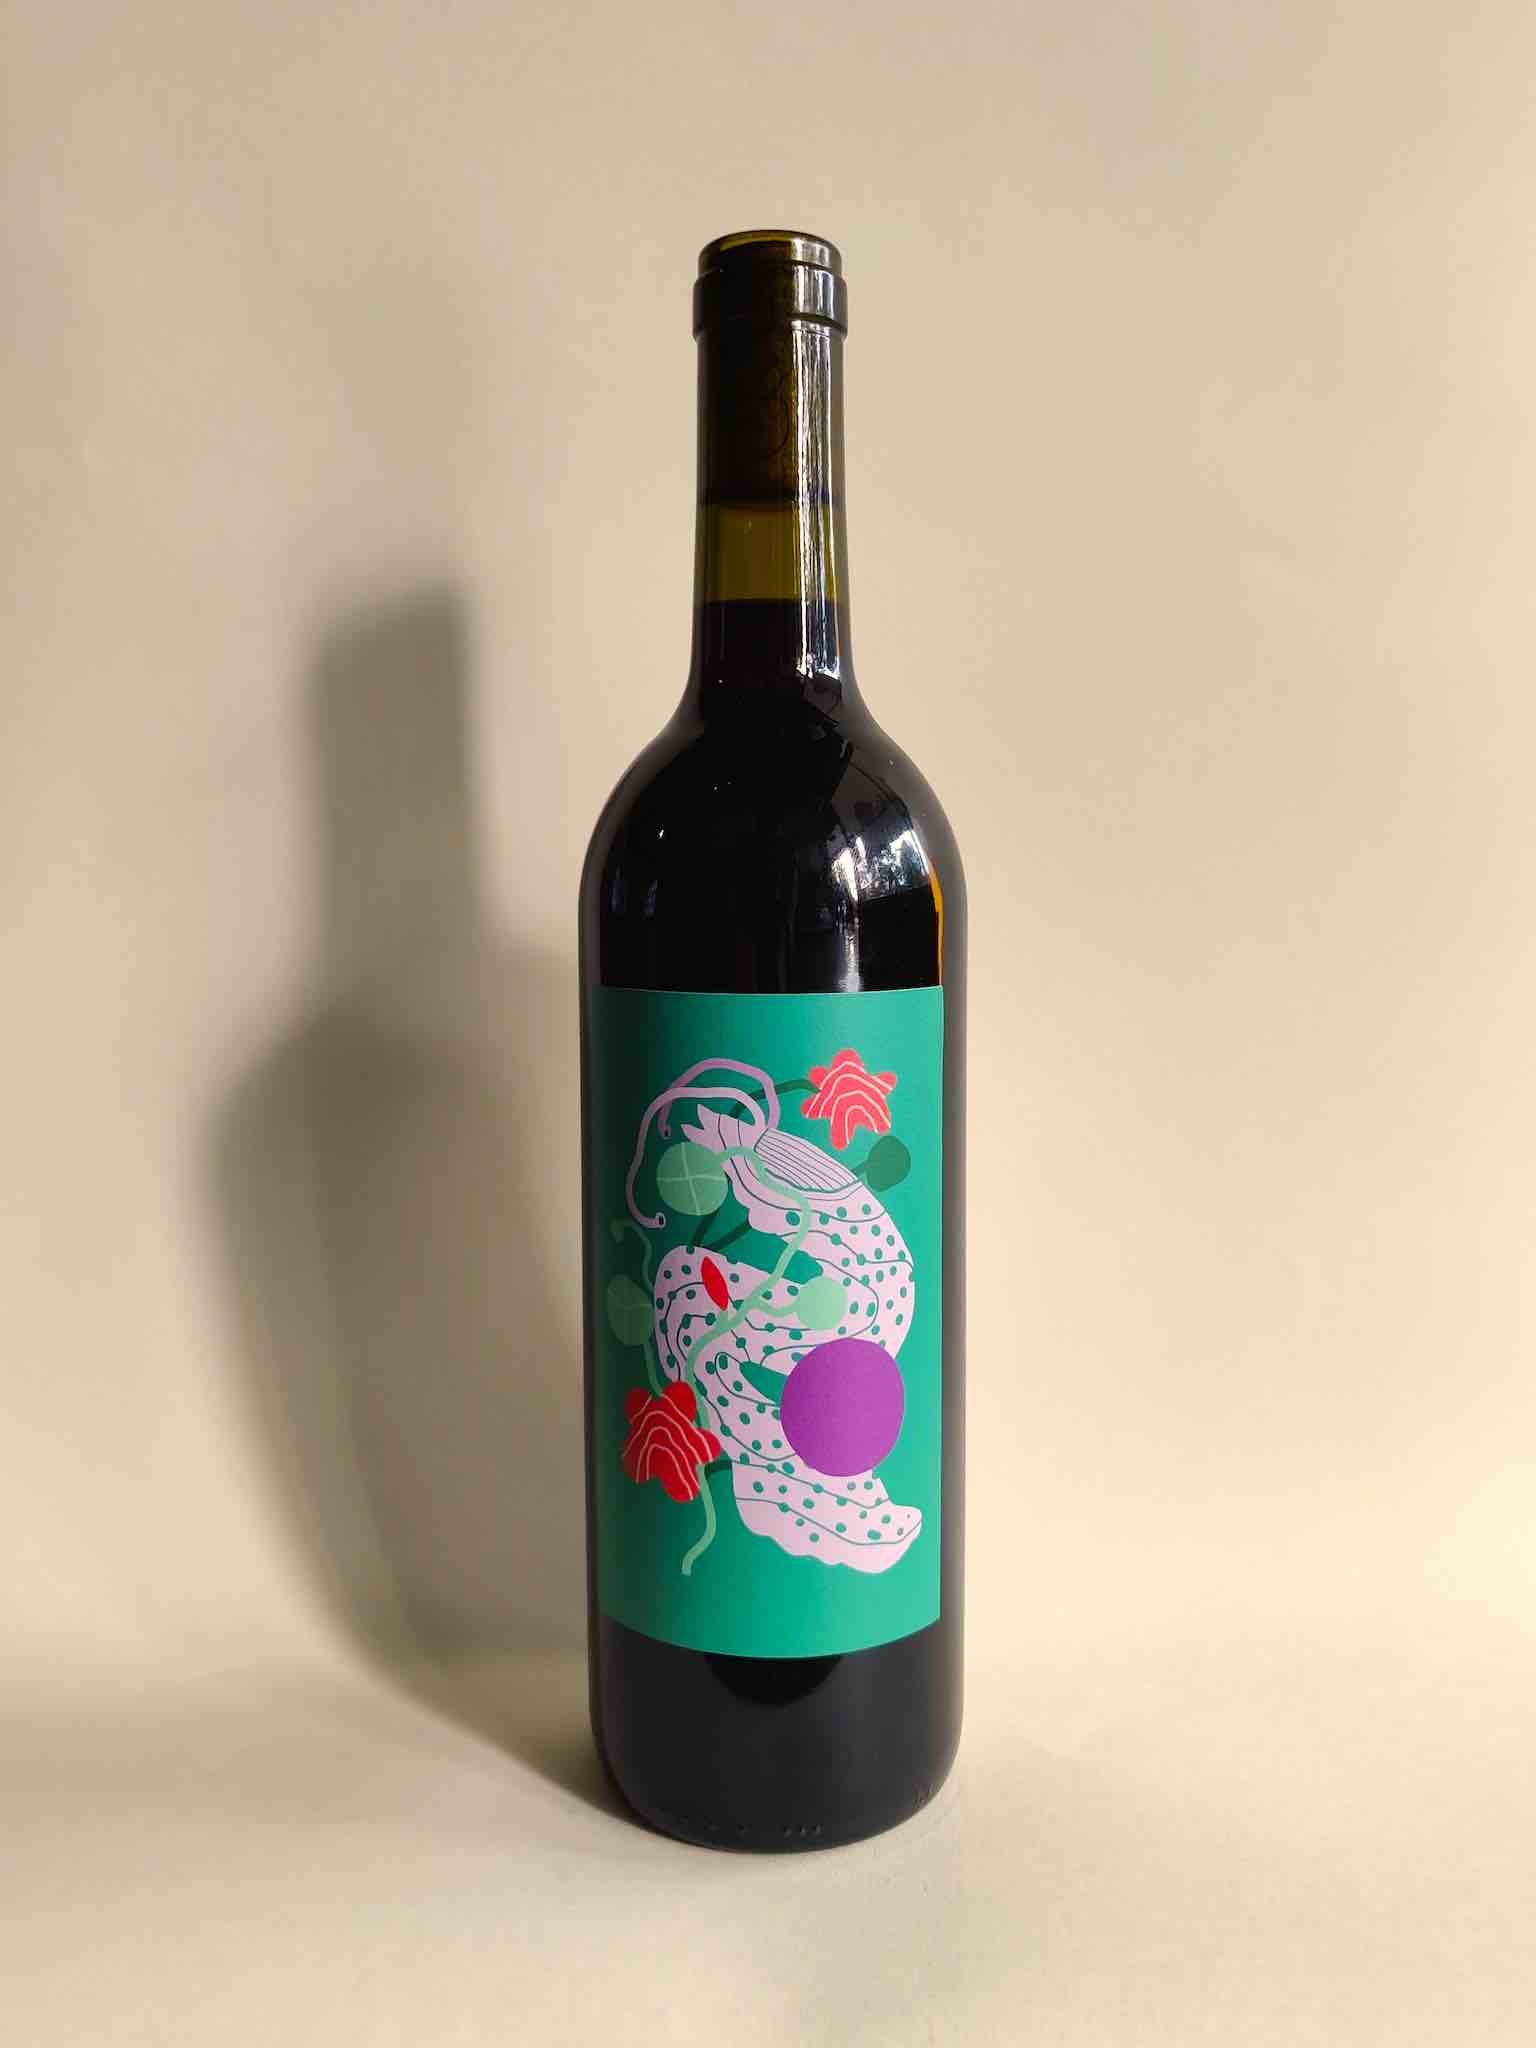 A 750ml bottle of Little Brunswick "in the shade we won't ever sit" Vine Dried Shiraz from Grampians, Victoria.